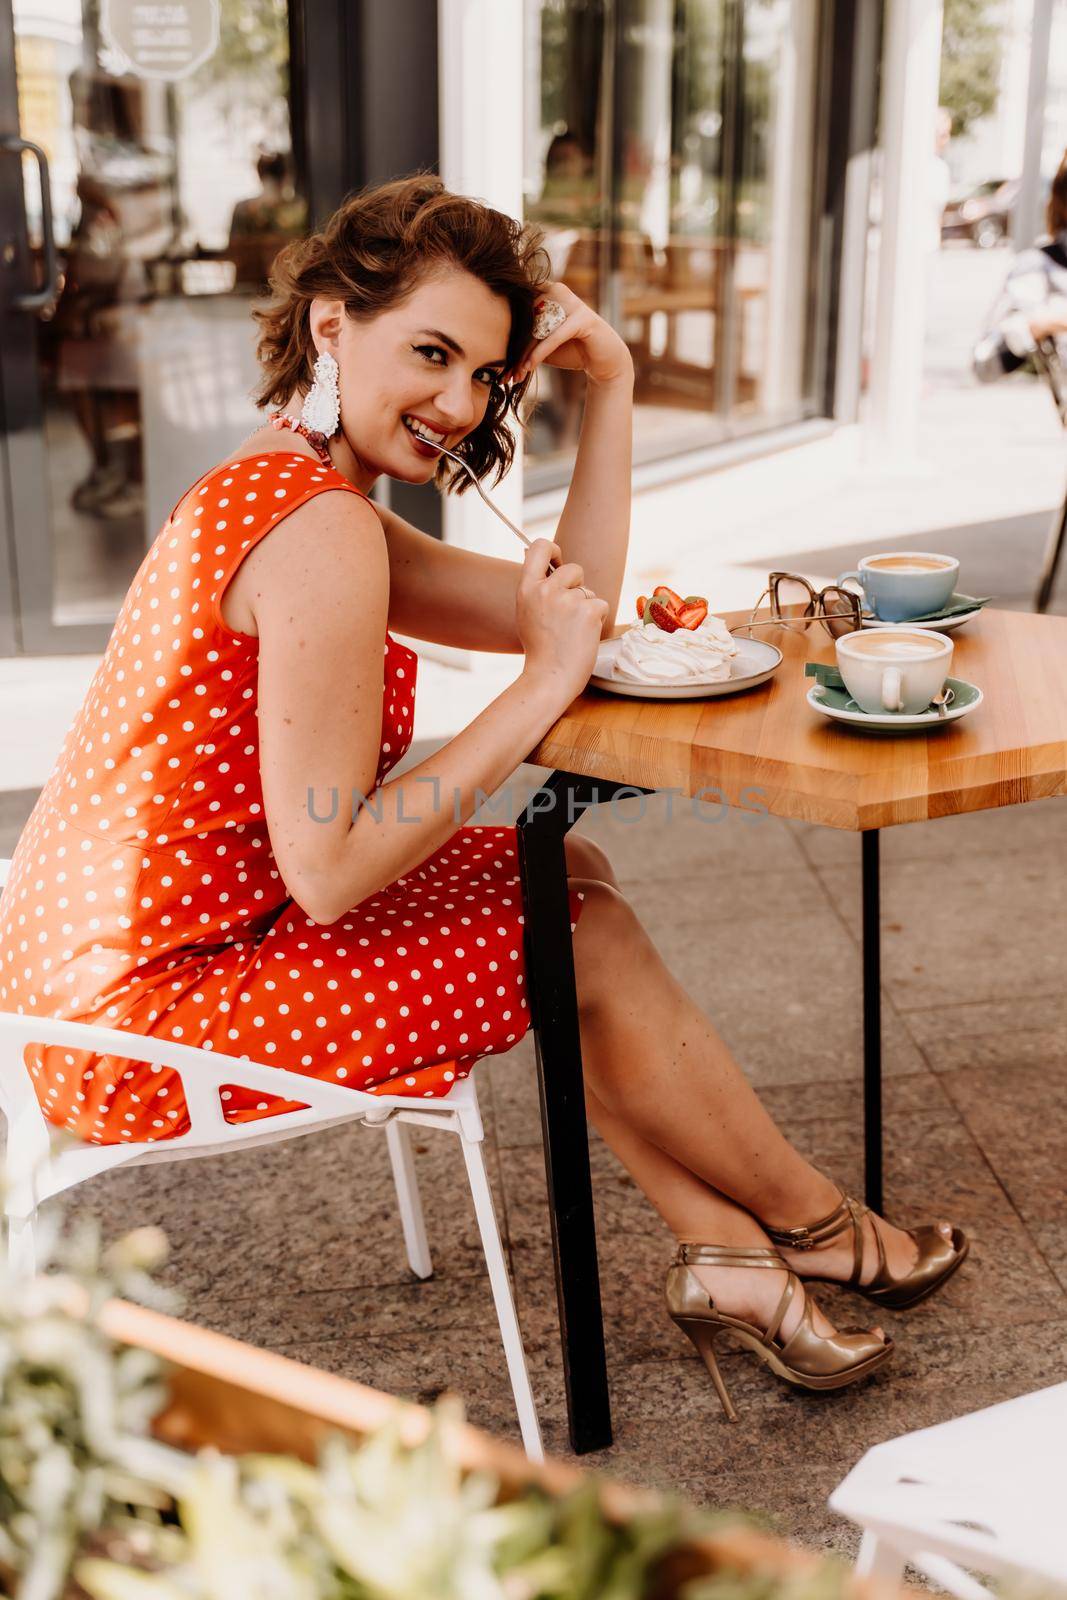 Charming woman in a restaurant, cafe on the street. She sits at the table and eats a cake with a fork. Dressed in a red sundress with white polka dots